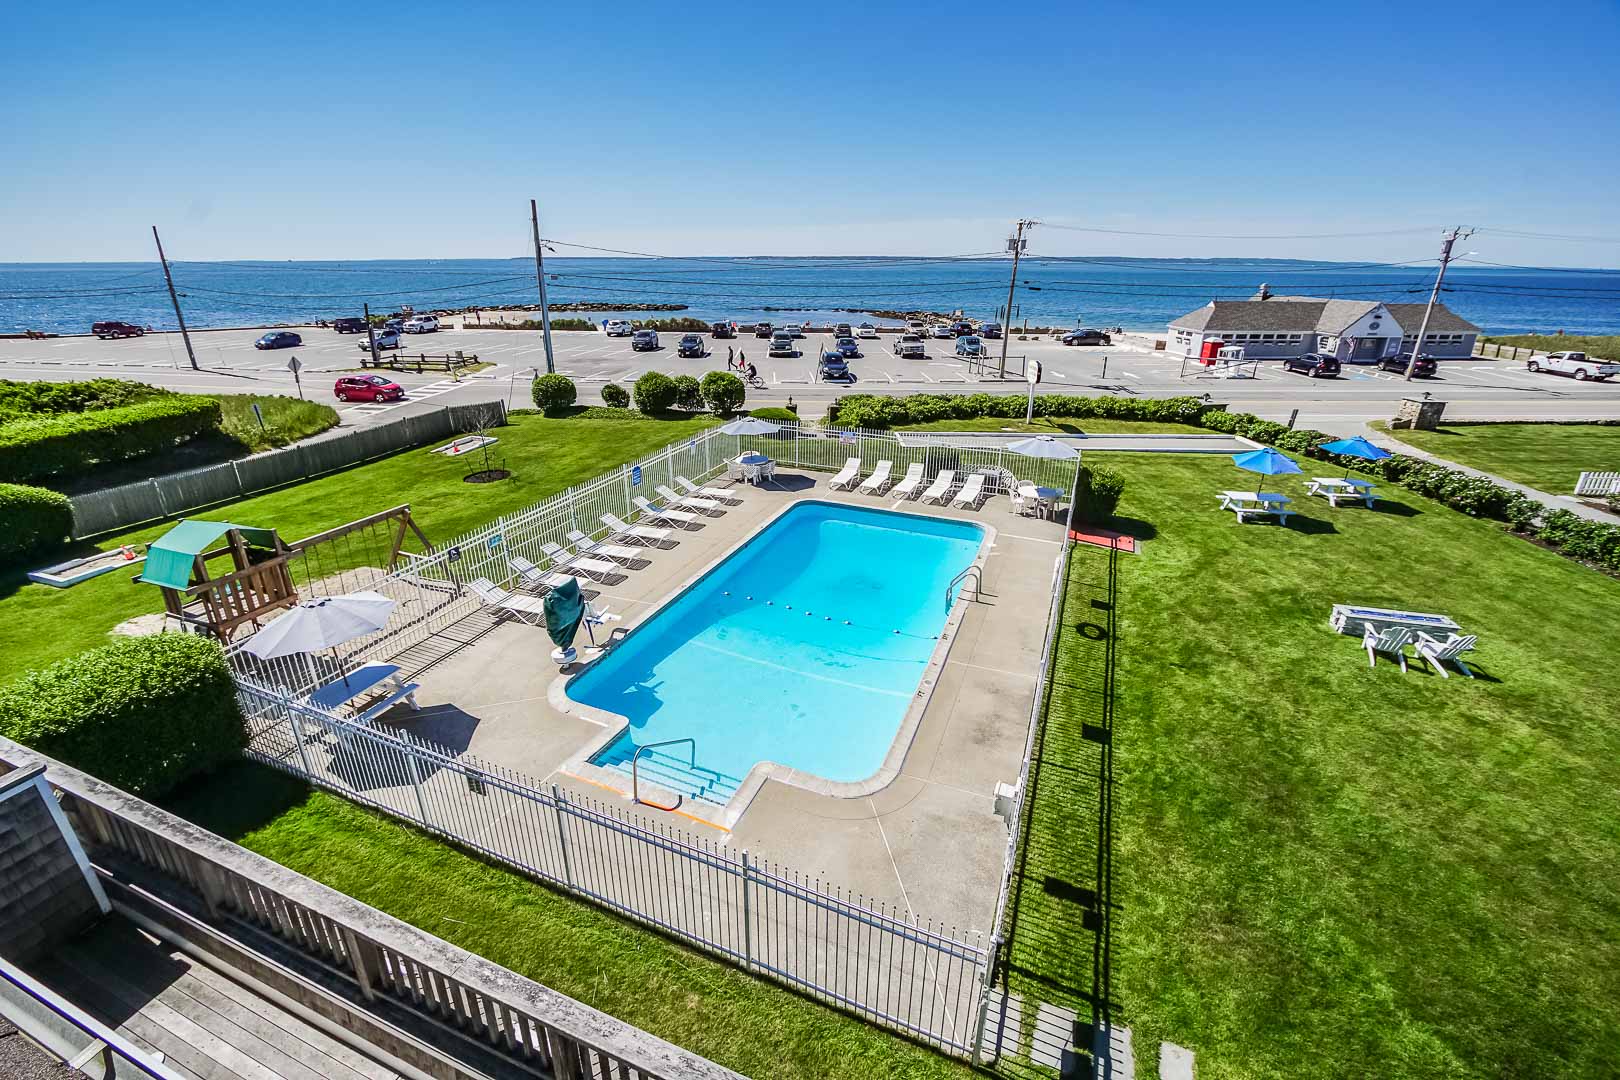 A scenic view of the pool at VRI's Beachside Village Resort in Massachusetts.